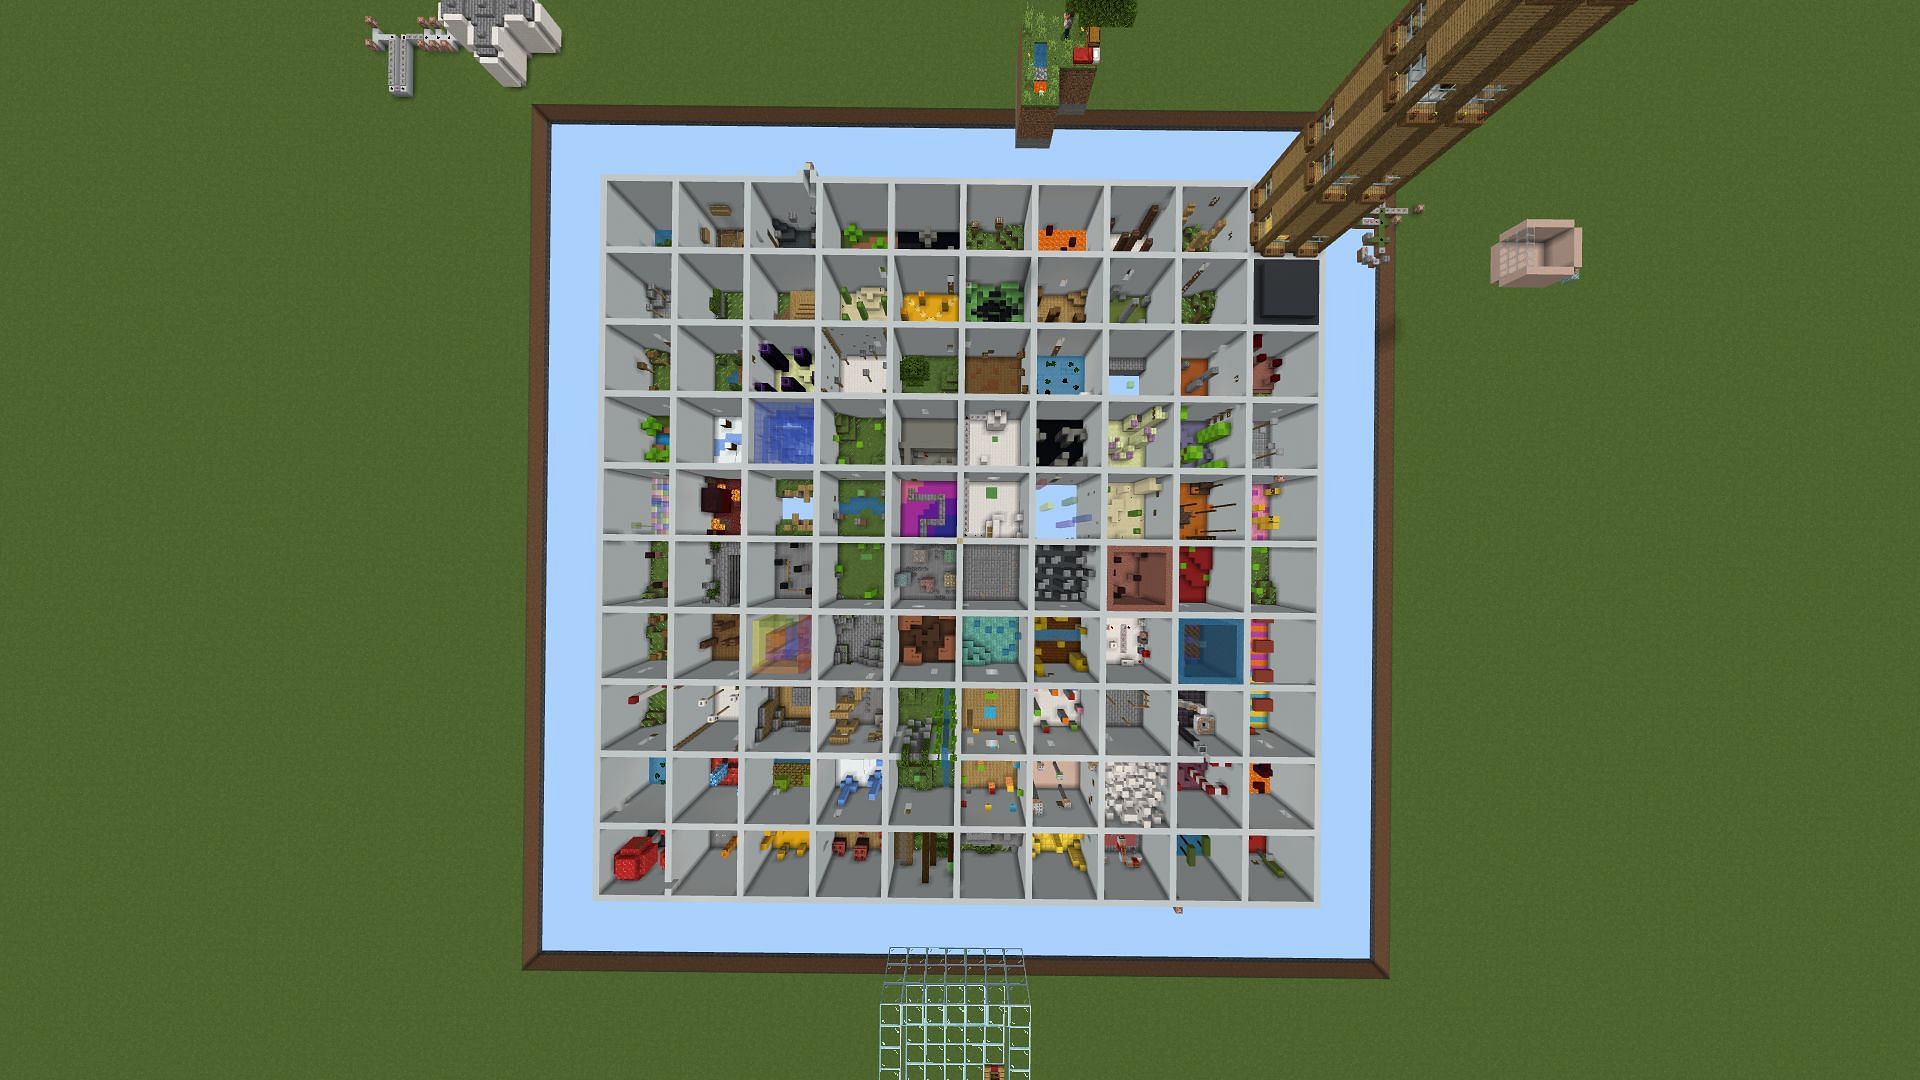 Parkour Grid offers 100 different Minecraft-themed courses and hours of fun (Image via Anibration)